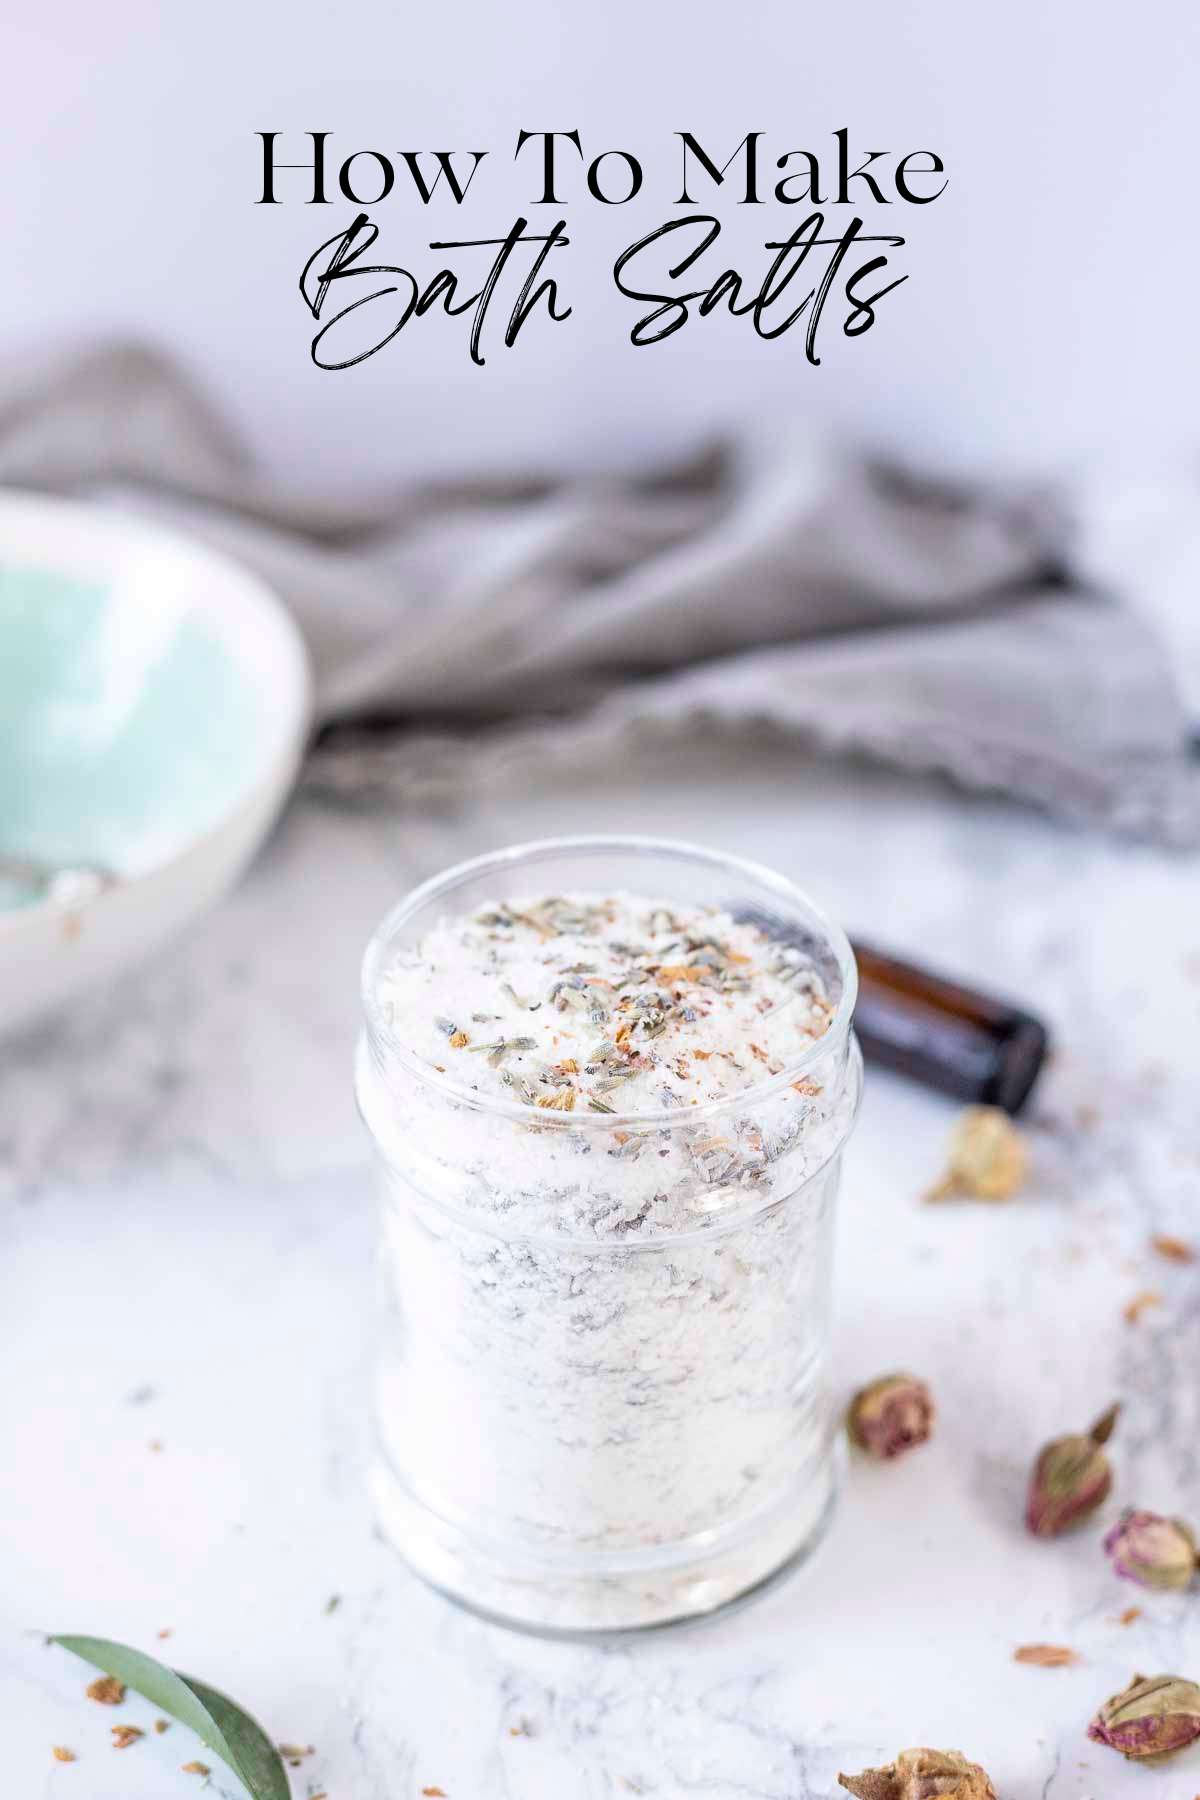 homemade bath salts in a glass jar with herbs on top. Dried herbs and flowers are around the jar.